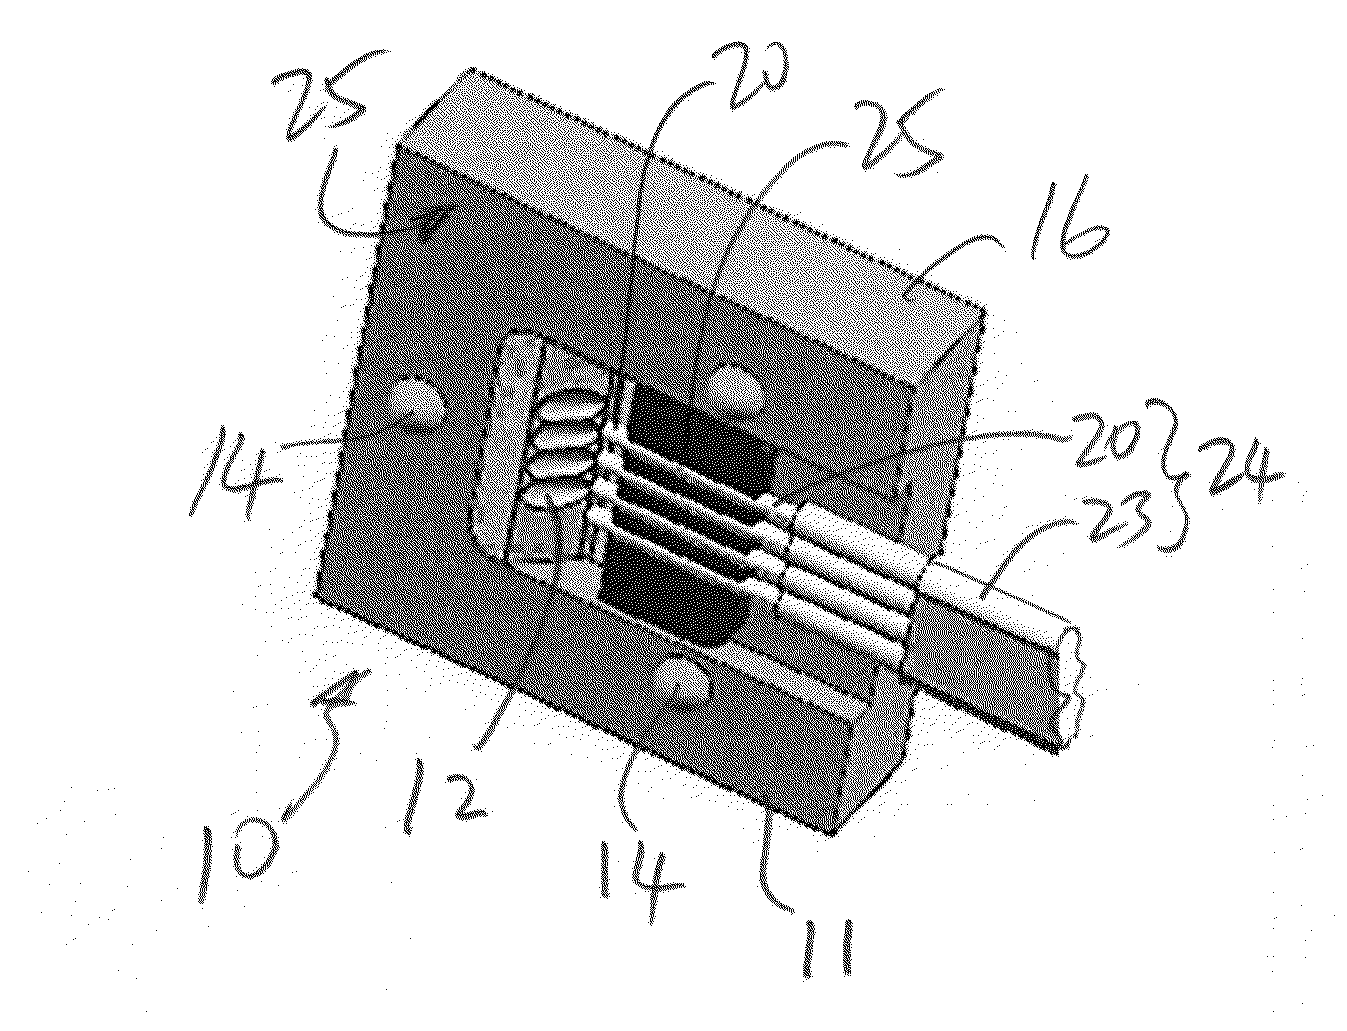 Demountable optical connector for optoelectronic devices